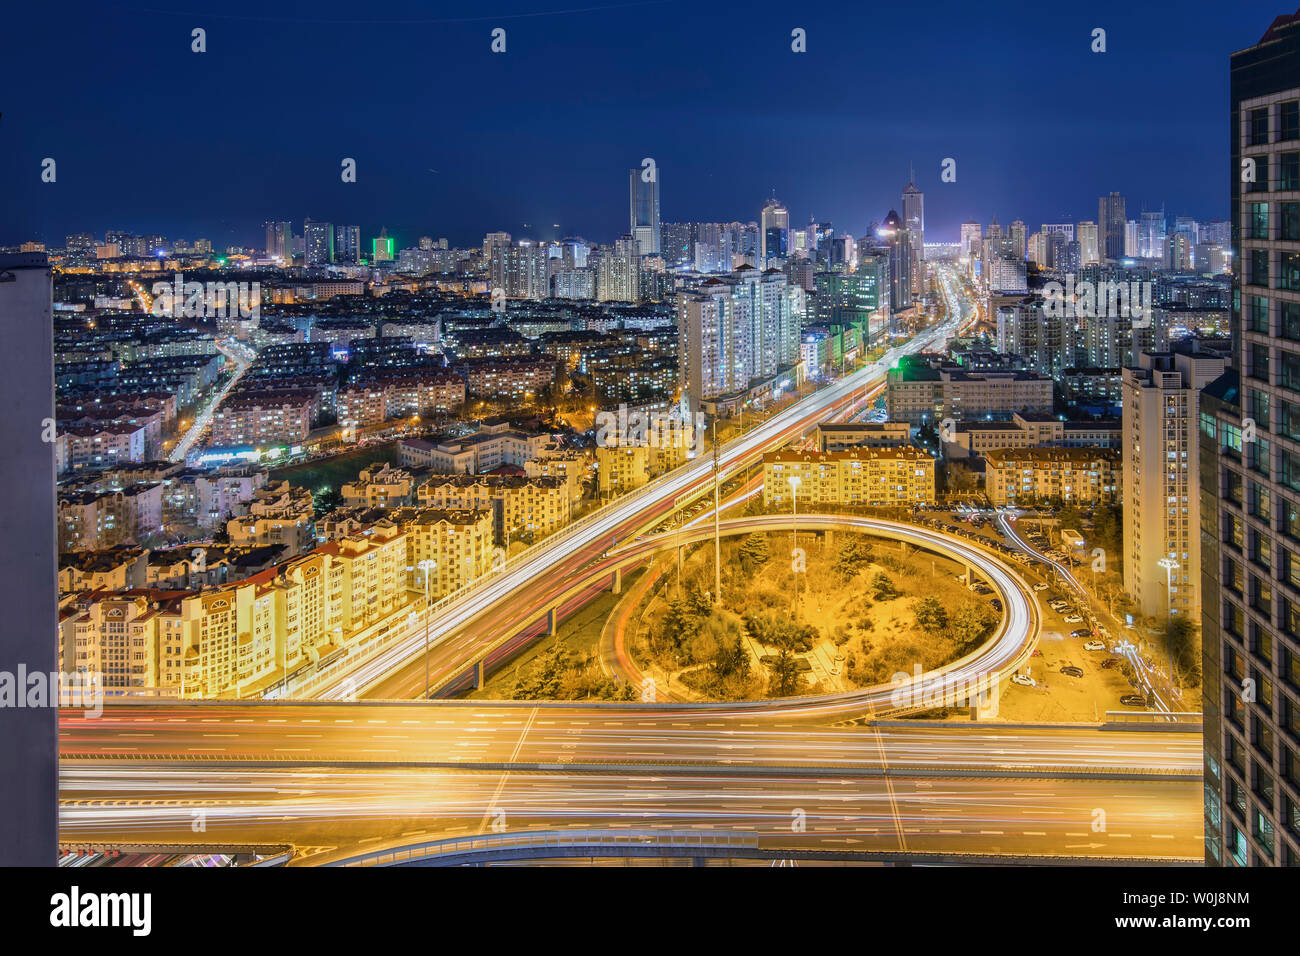 Night view of overpass in southern district of Qingdao Stock Photo